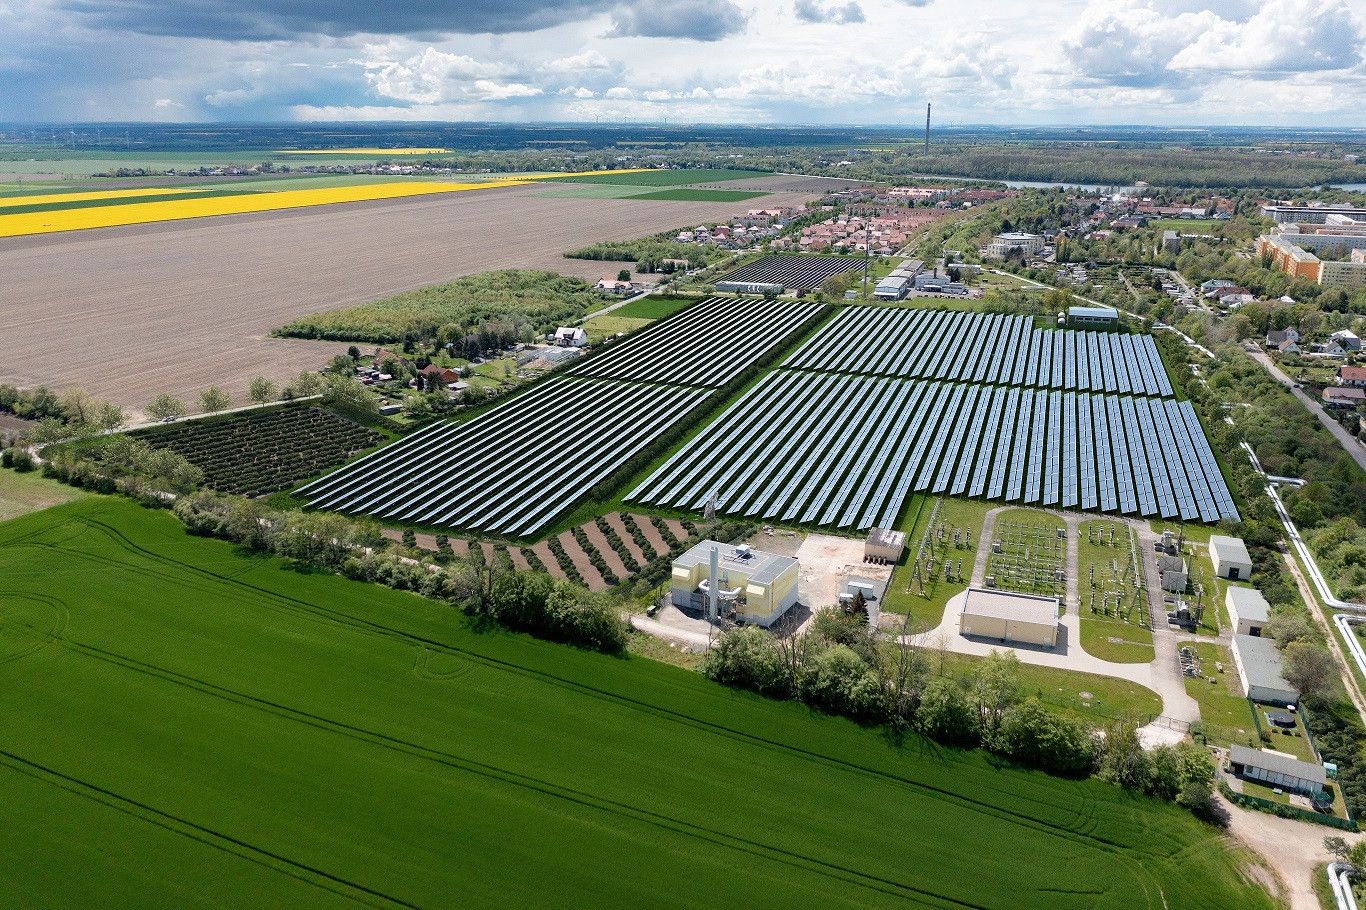 “Green” district heating for Leipzig: Leipziger Stadtwerke starts construction of the biggest solar thermal energy plant in Germany